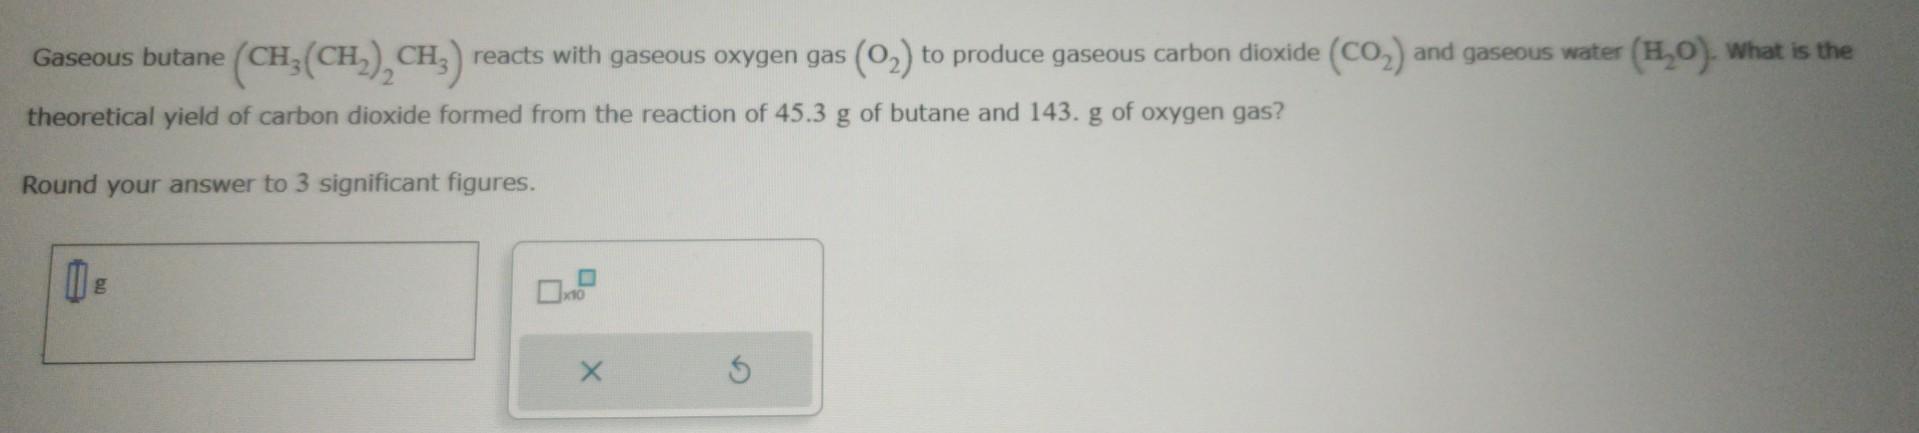 Solved Gaseous butane (CH3(CH2)2CH3) reacts with gaseous | Chegg.com